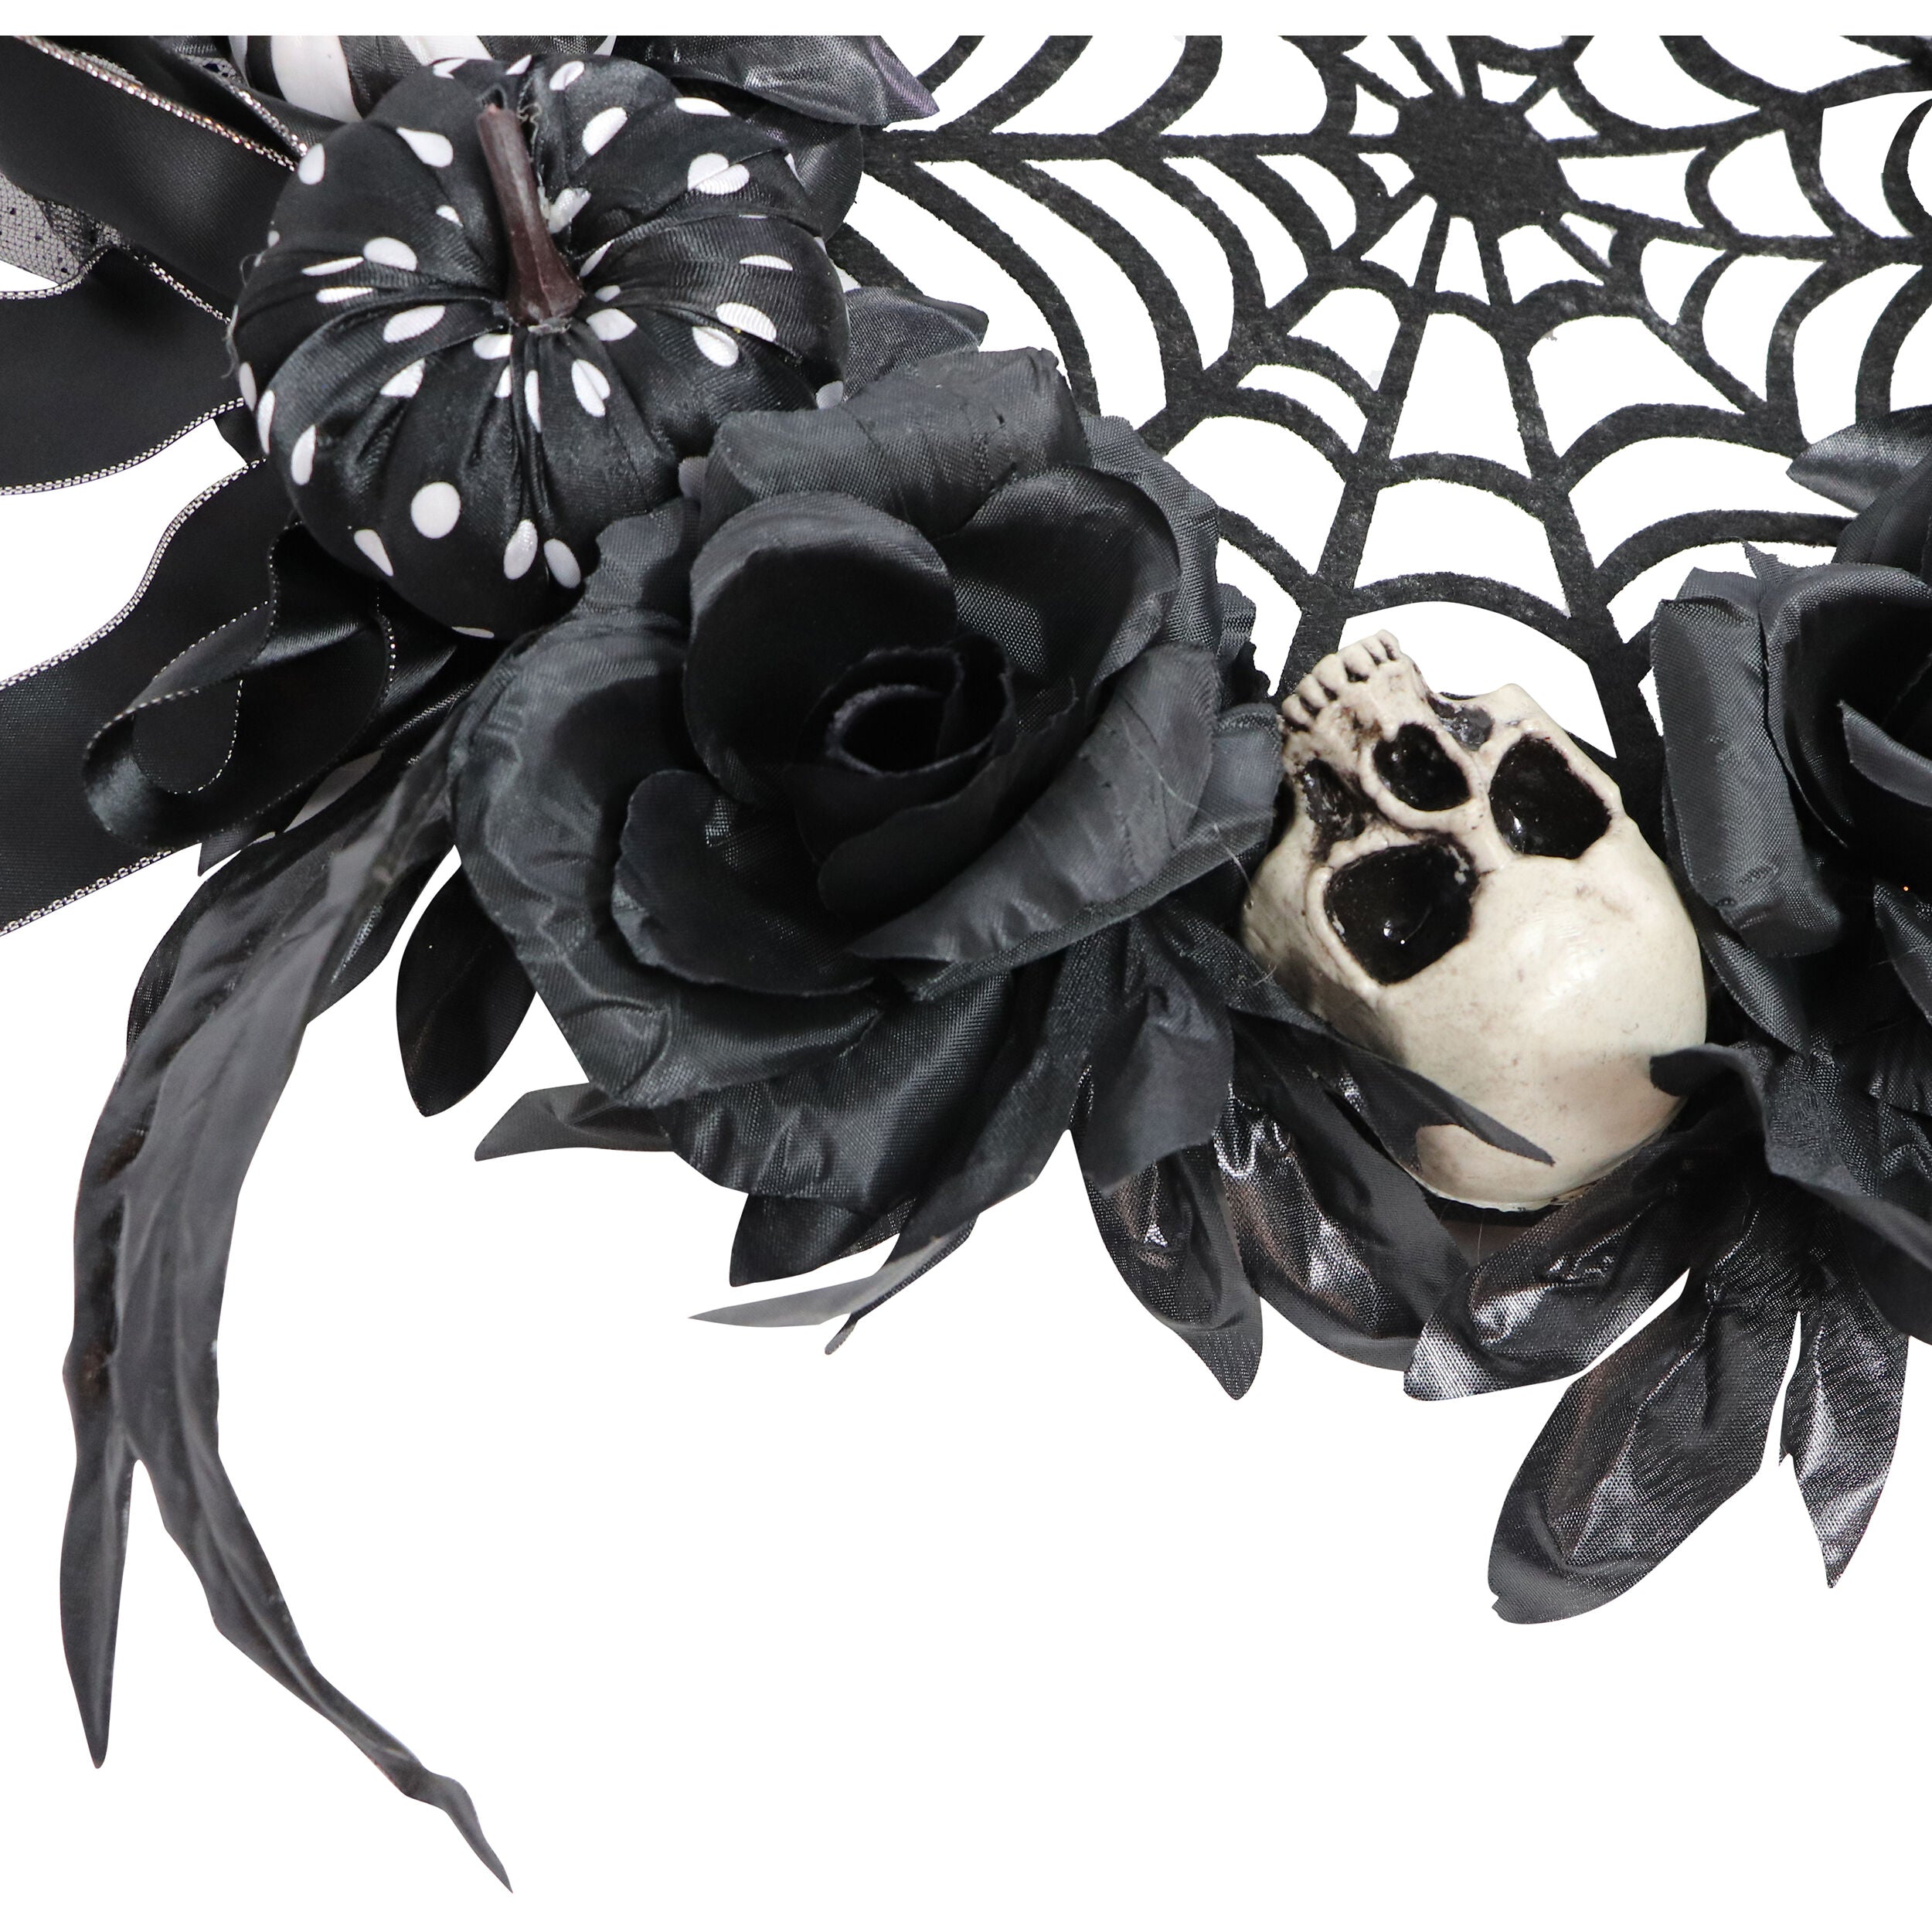 Haunted Hill Farm -  15-In. Halloween Black and White Floral Wreath with Pumpkins, Skulls, and Spiderweb for Haunted House Hanging Decoration